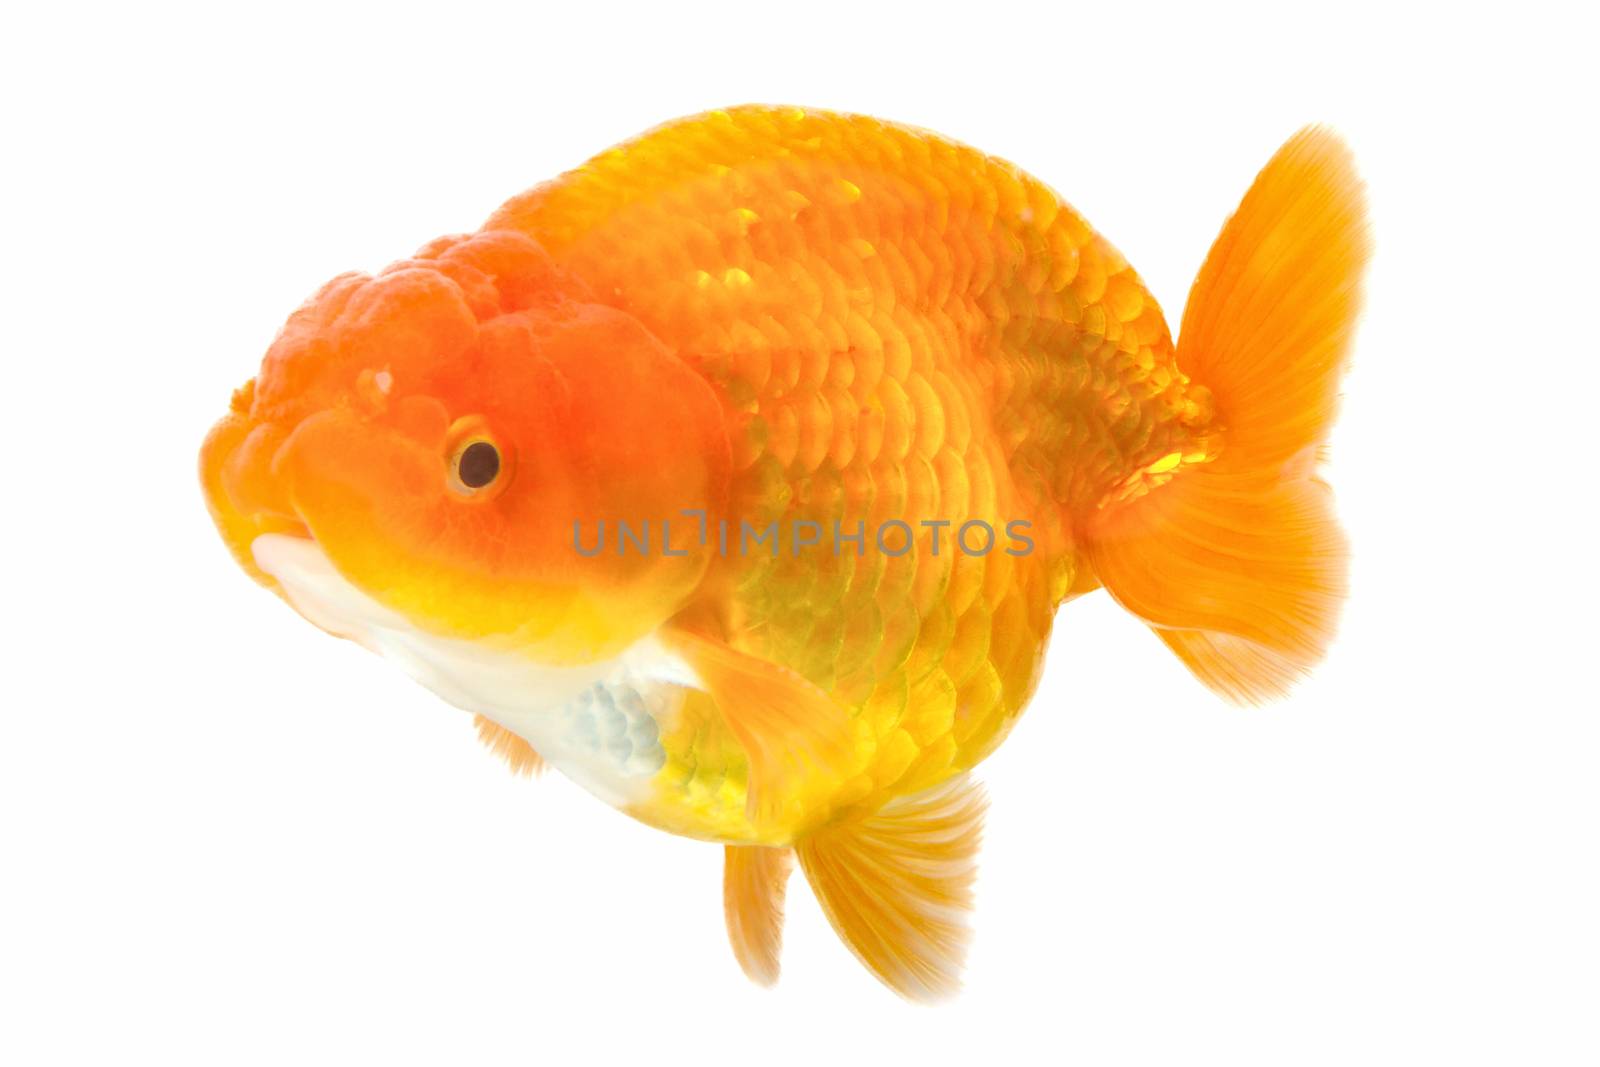 goldfish on white background by ronnarong